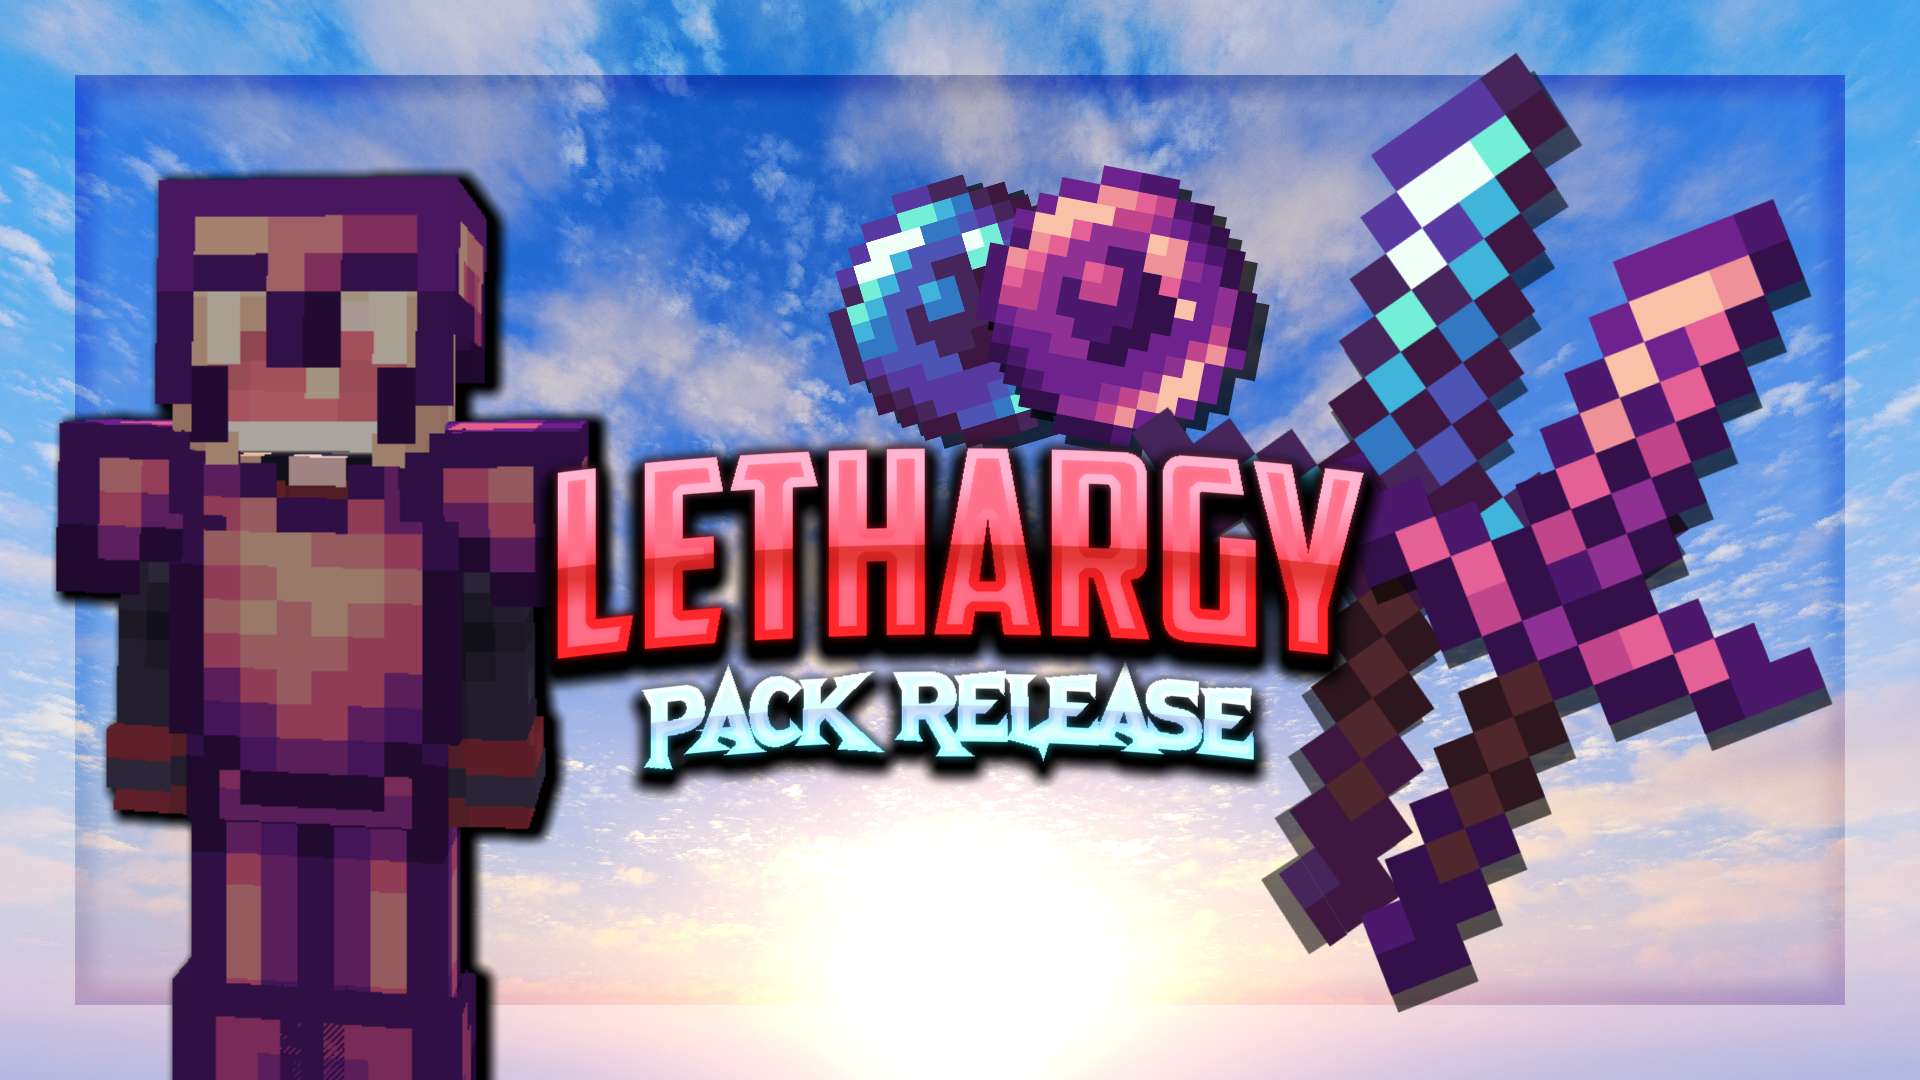 Lethargy (Blue version) 16x by Yuruze on PvPRP